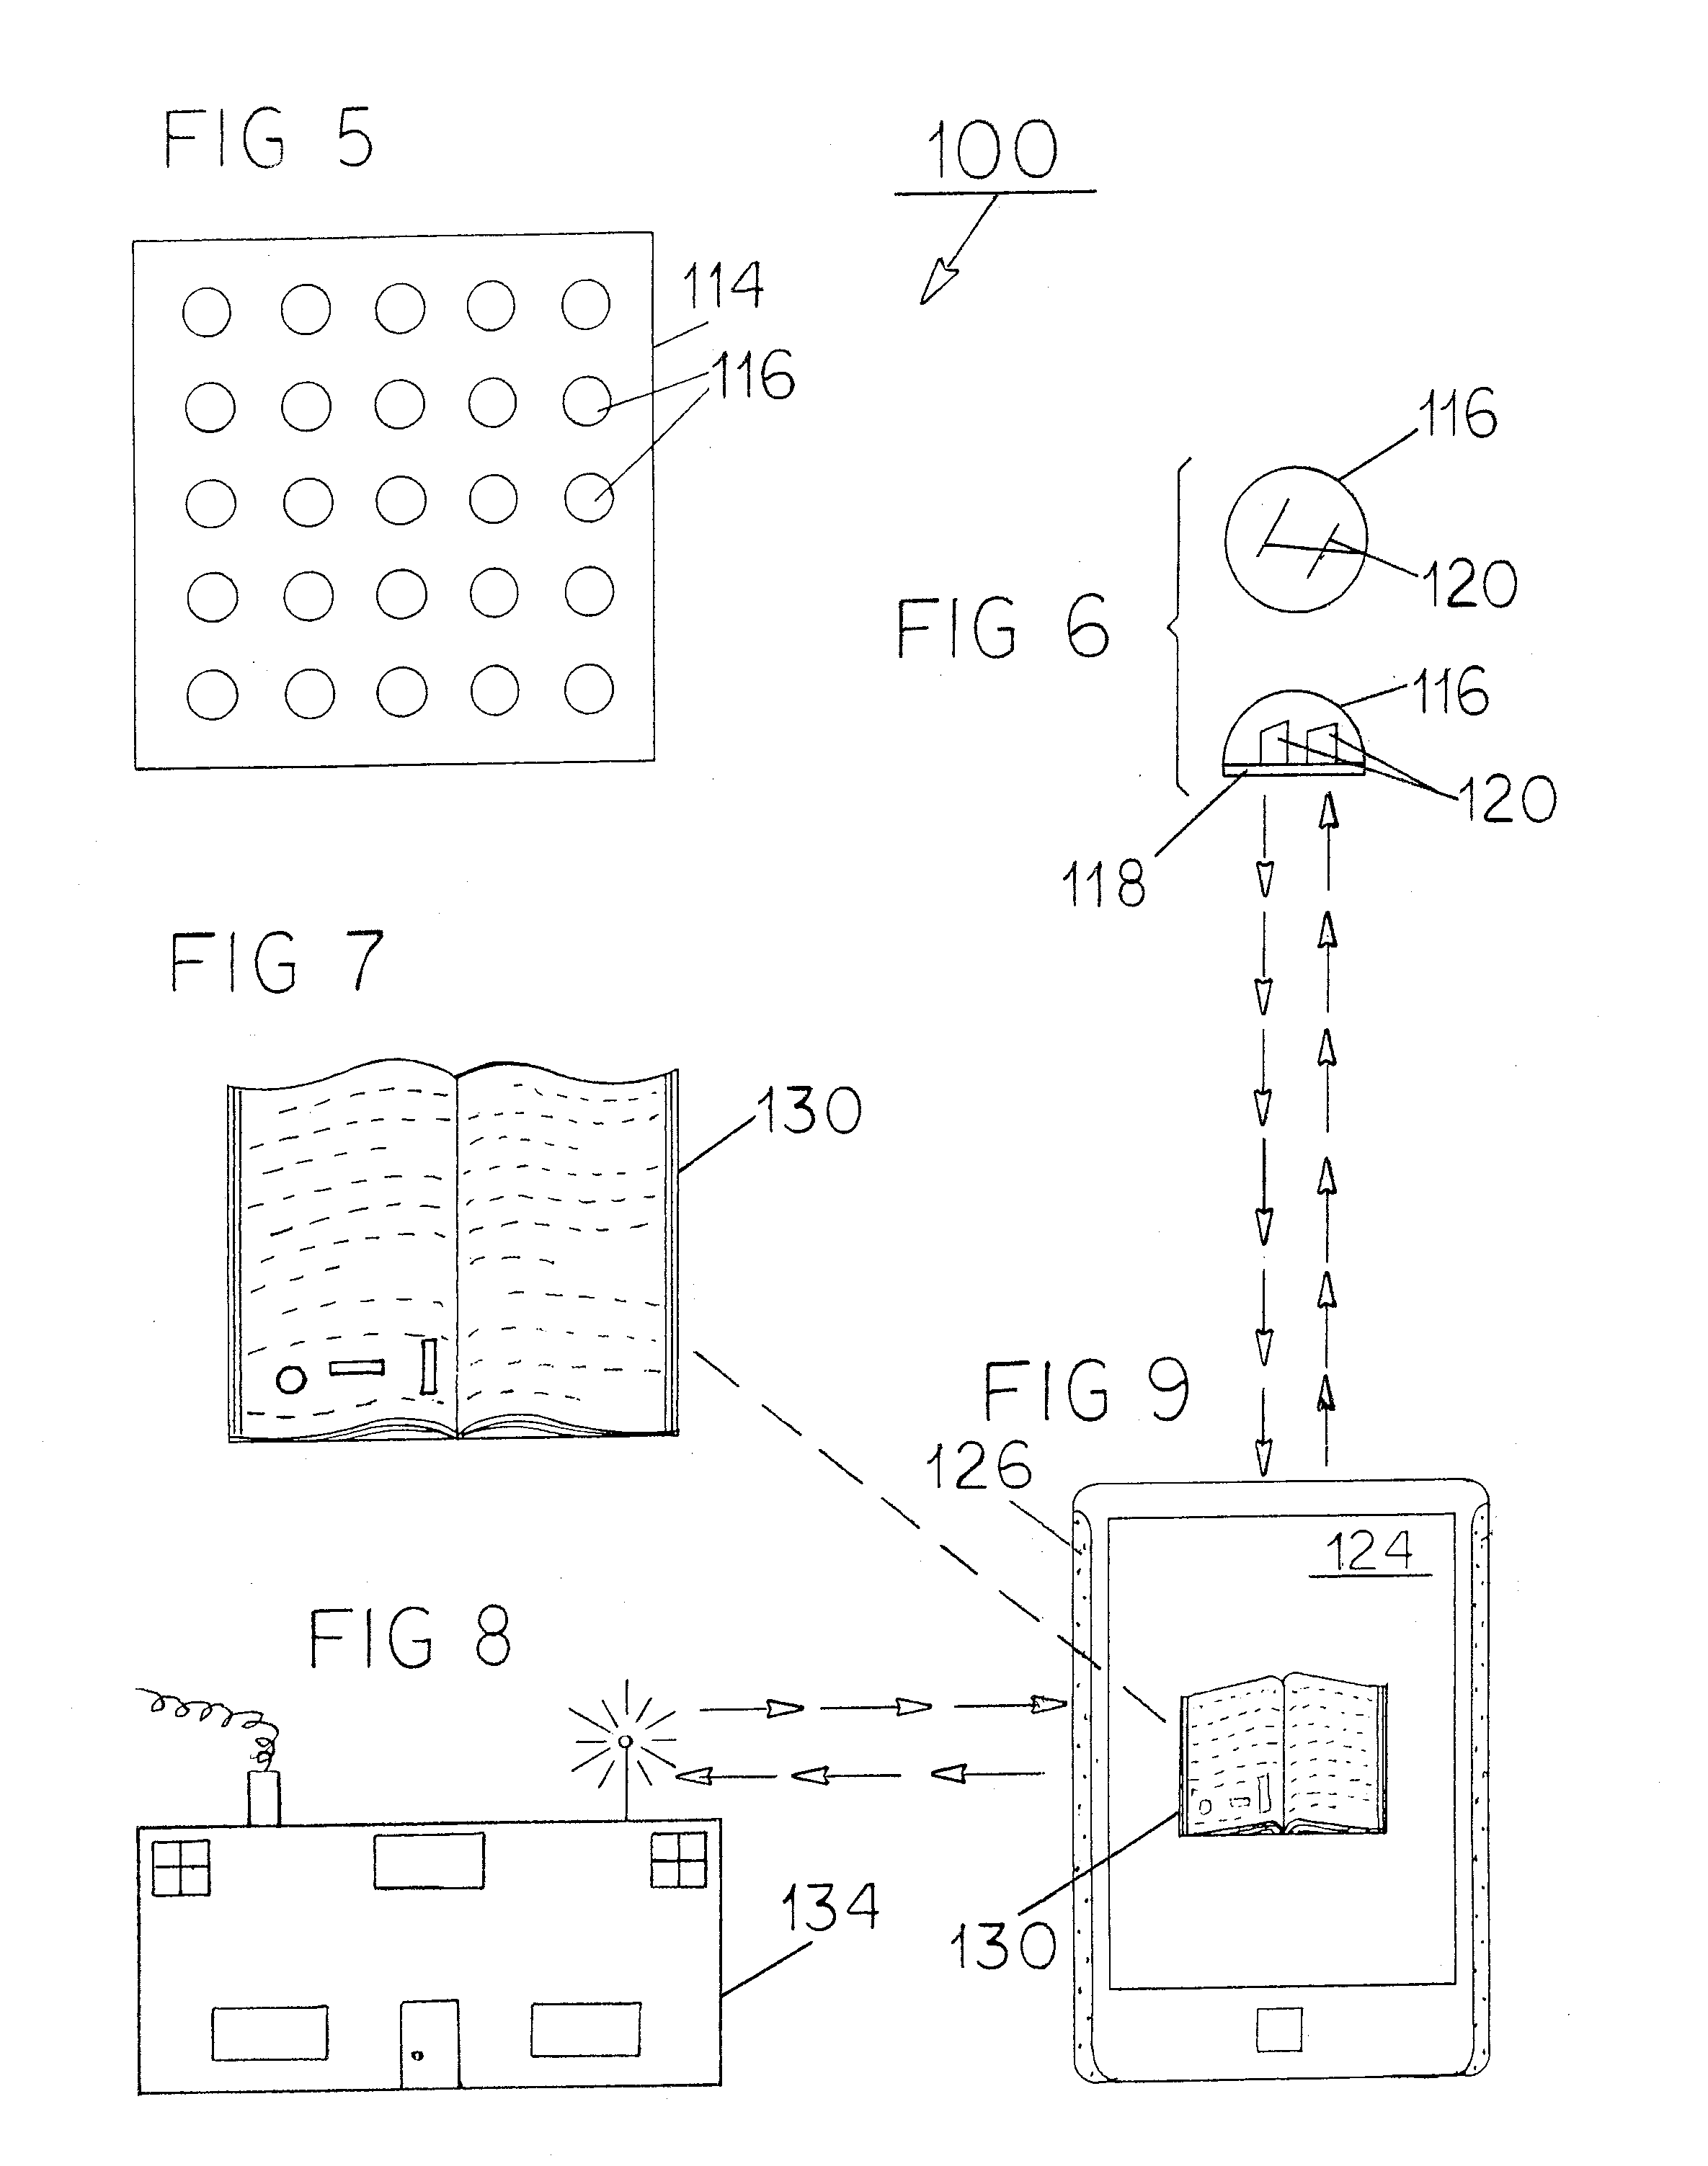 Needle-less/wireless acupuncture system and method